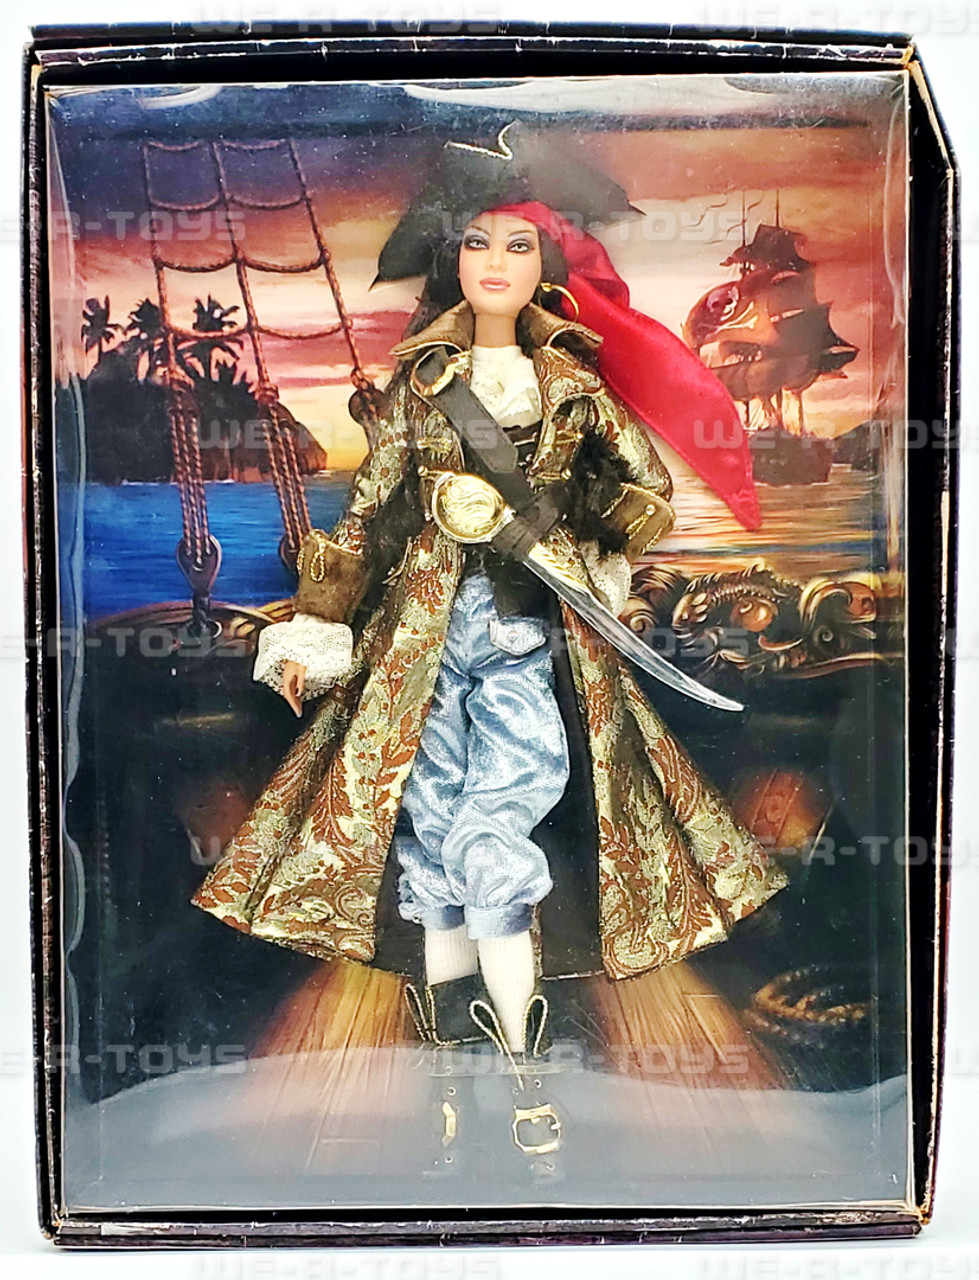 Barbie the Pirate Doll Gold Label 2007 Mattel No. K7972 Barbie Collector  NRFB